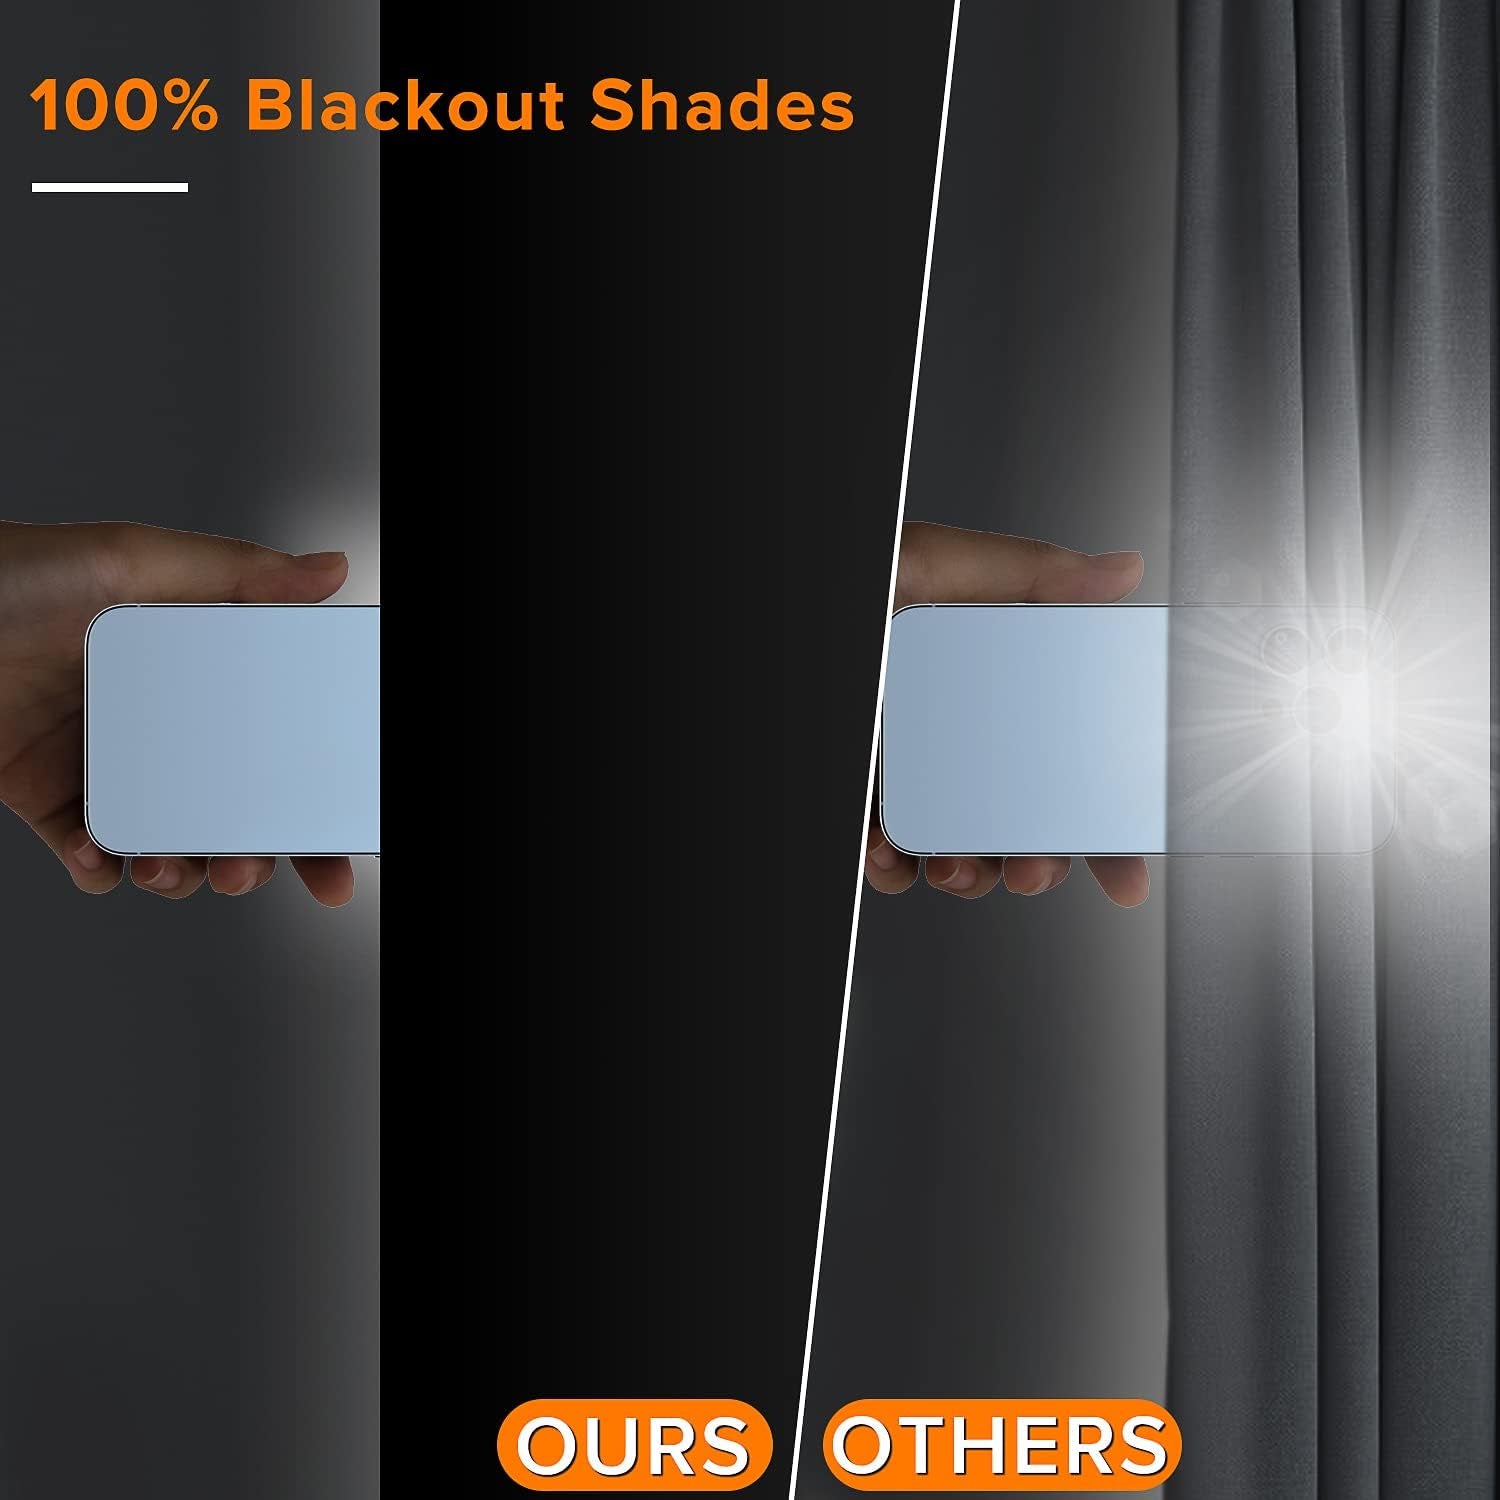 Portable Blackout Curtains, (118" X 57") Blackout Shades, 100% Portable Blackout Blinds for Any Window with 30 Pair Hook & Loop Tabs Stick-On, Temporary Blackout Shades for Baby/Travelers/Bedroom  SUSNID   